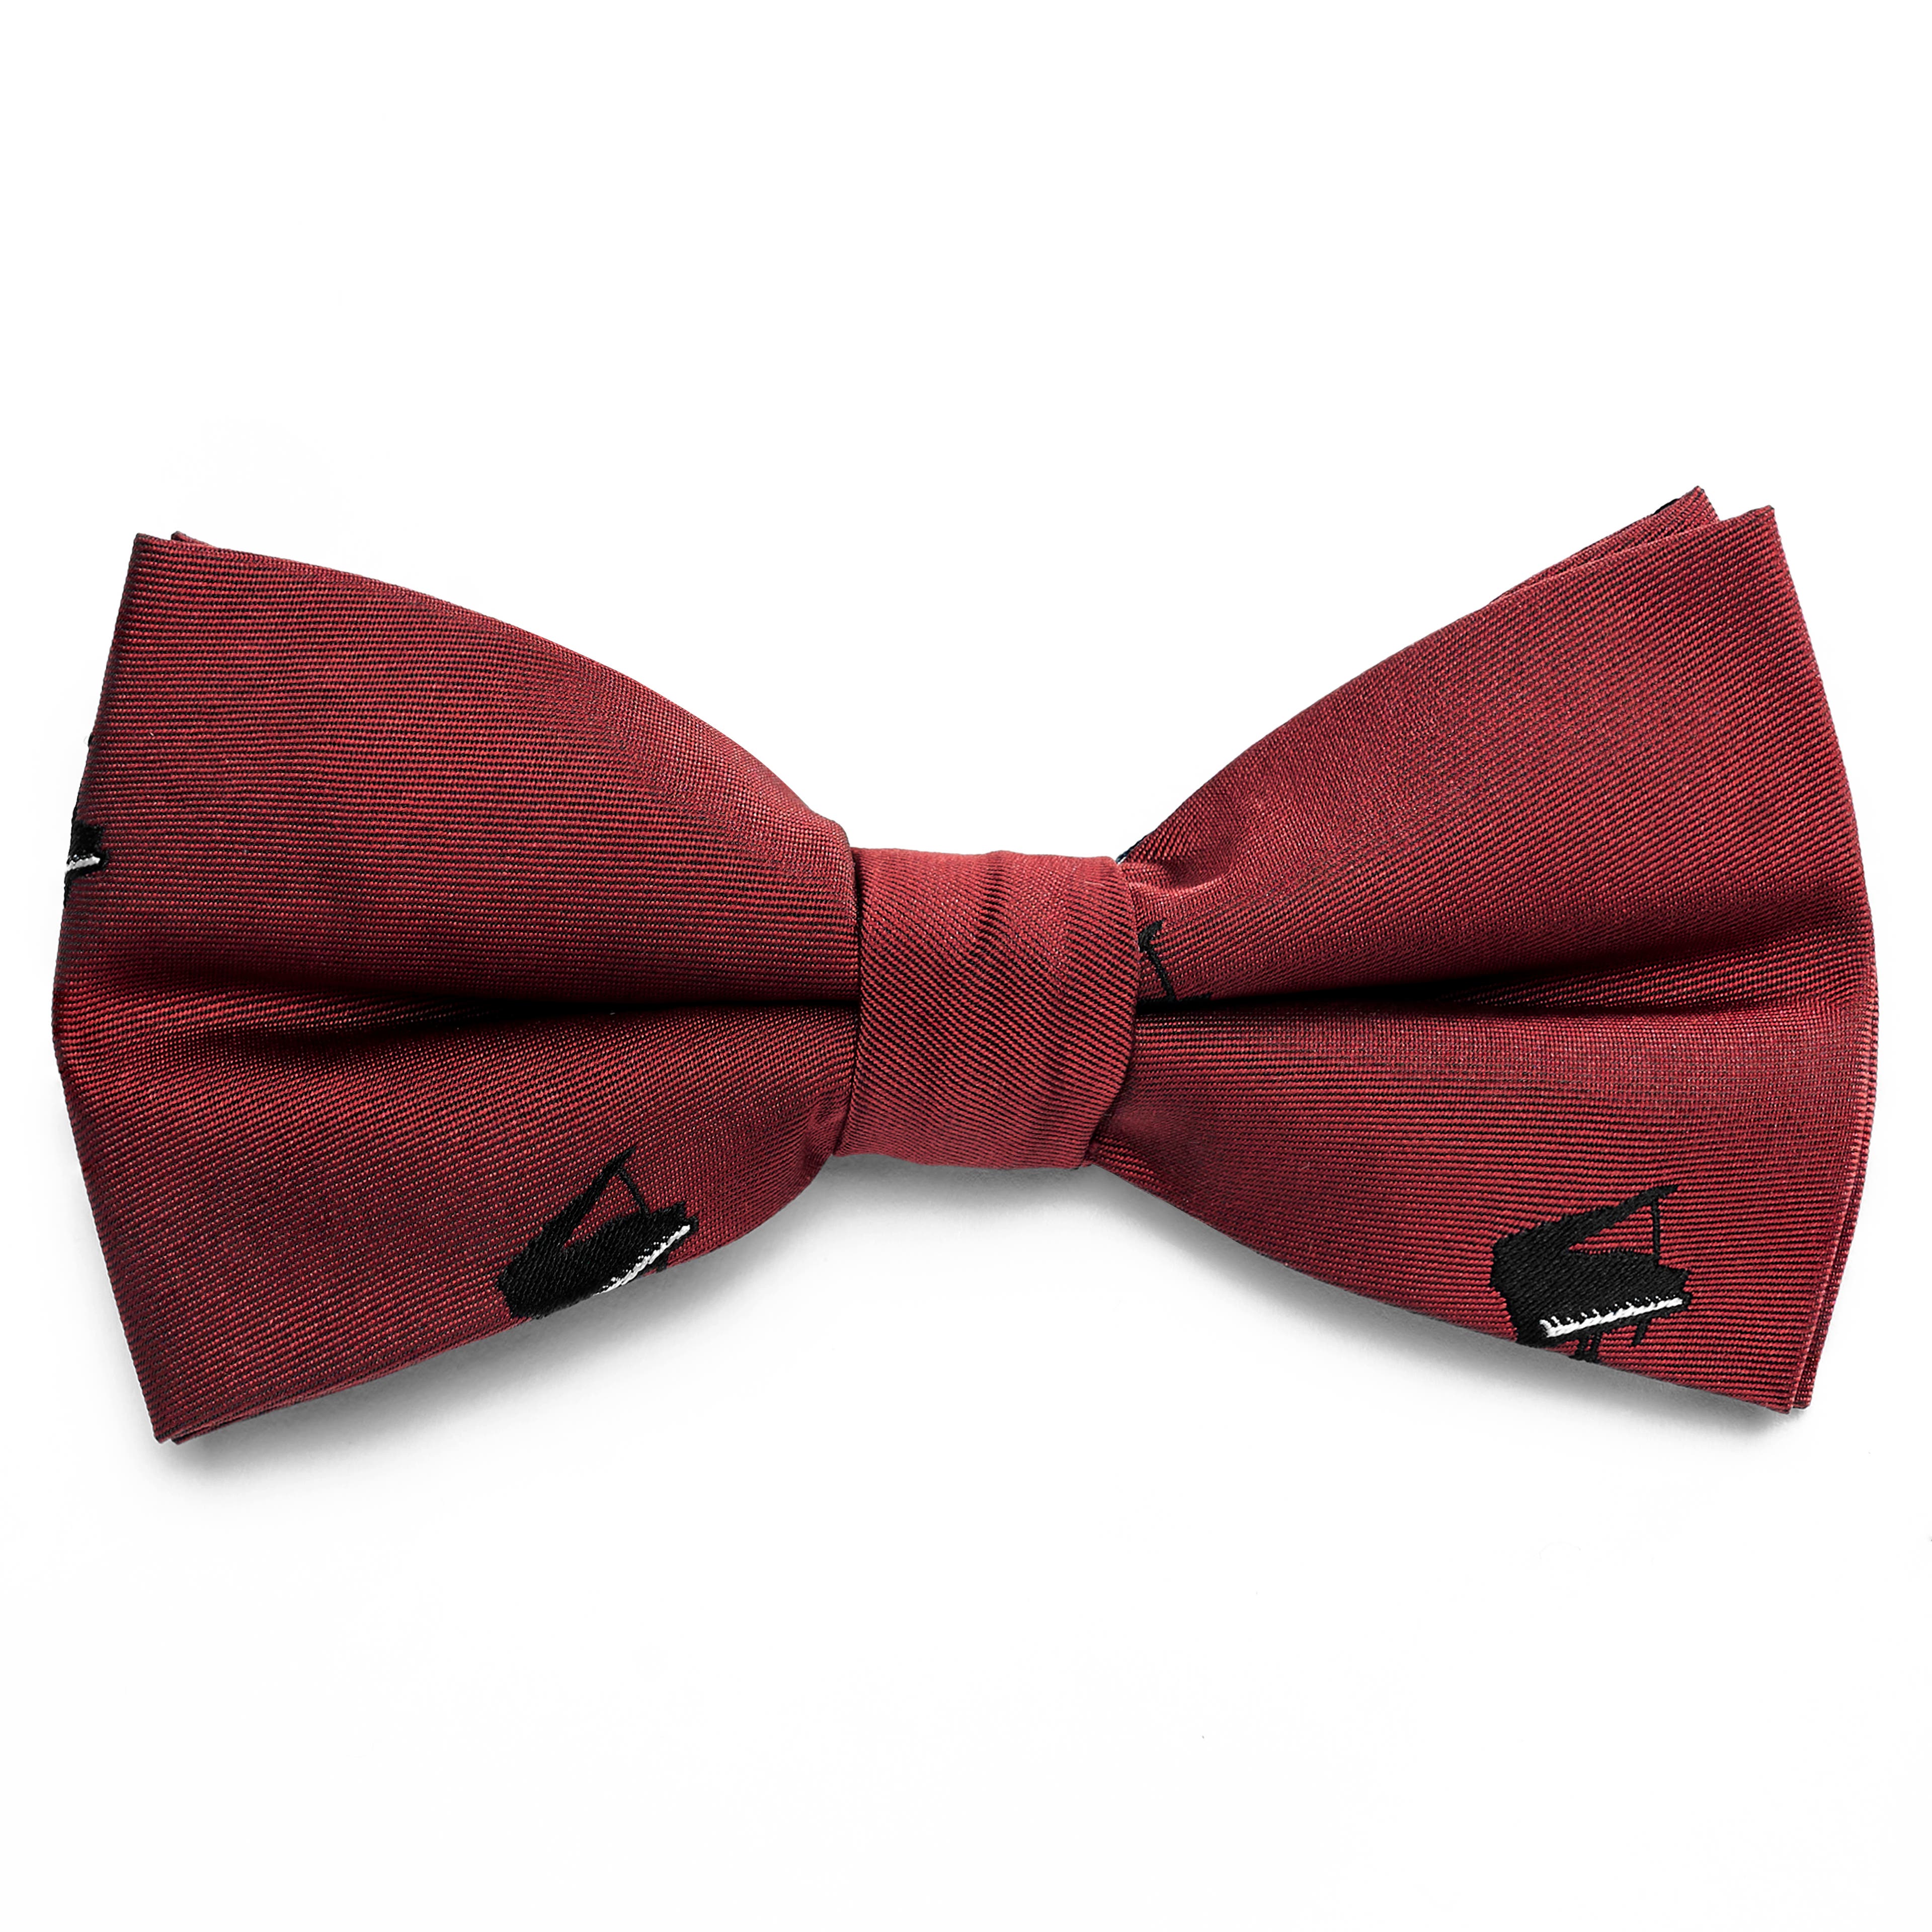 Burgundy with Pianos Pre-Tied Bow Tie